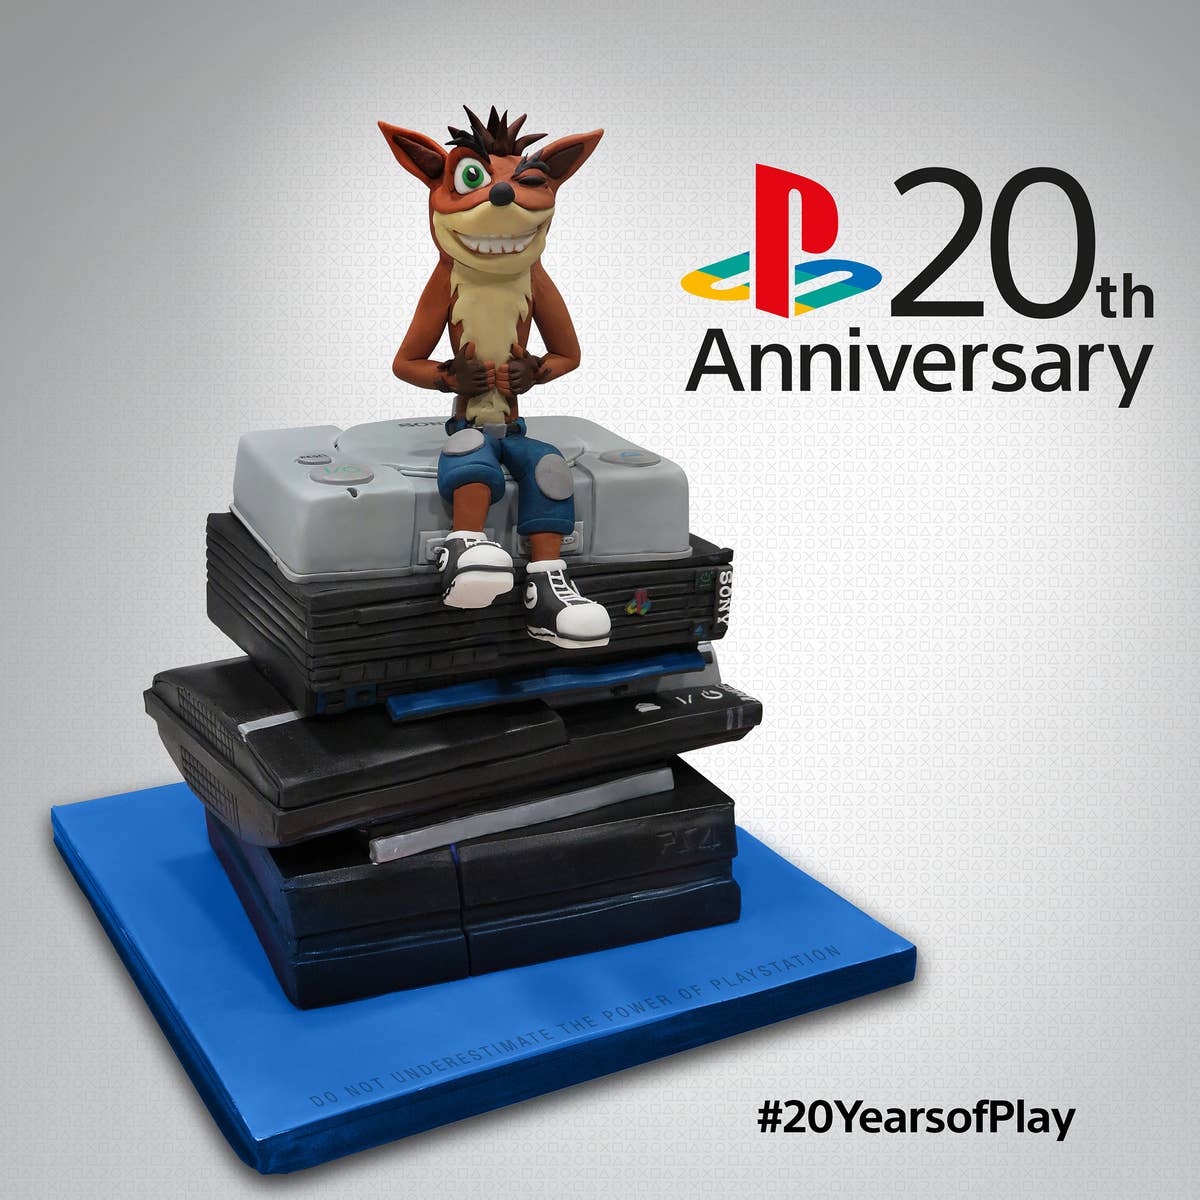 Eurogamer - It's our 20th anniversary this week! Come see